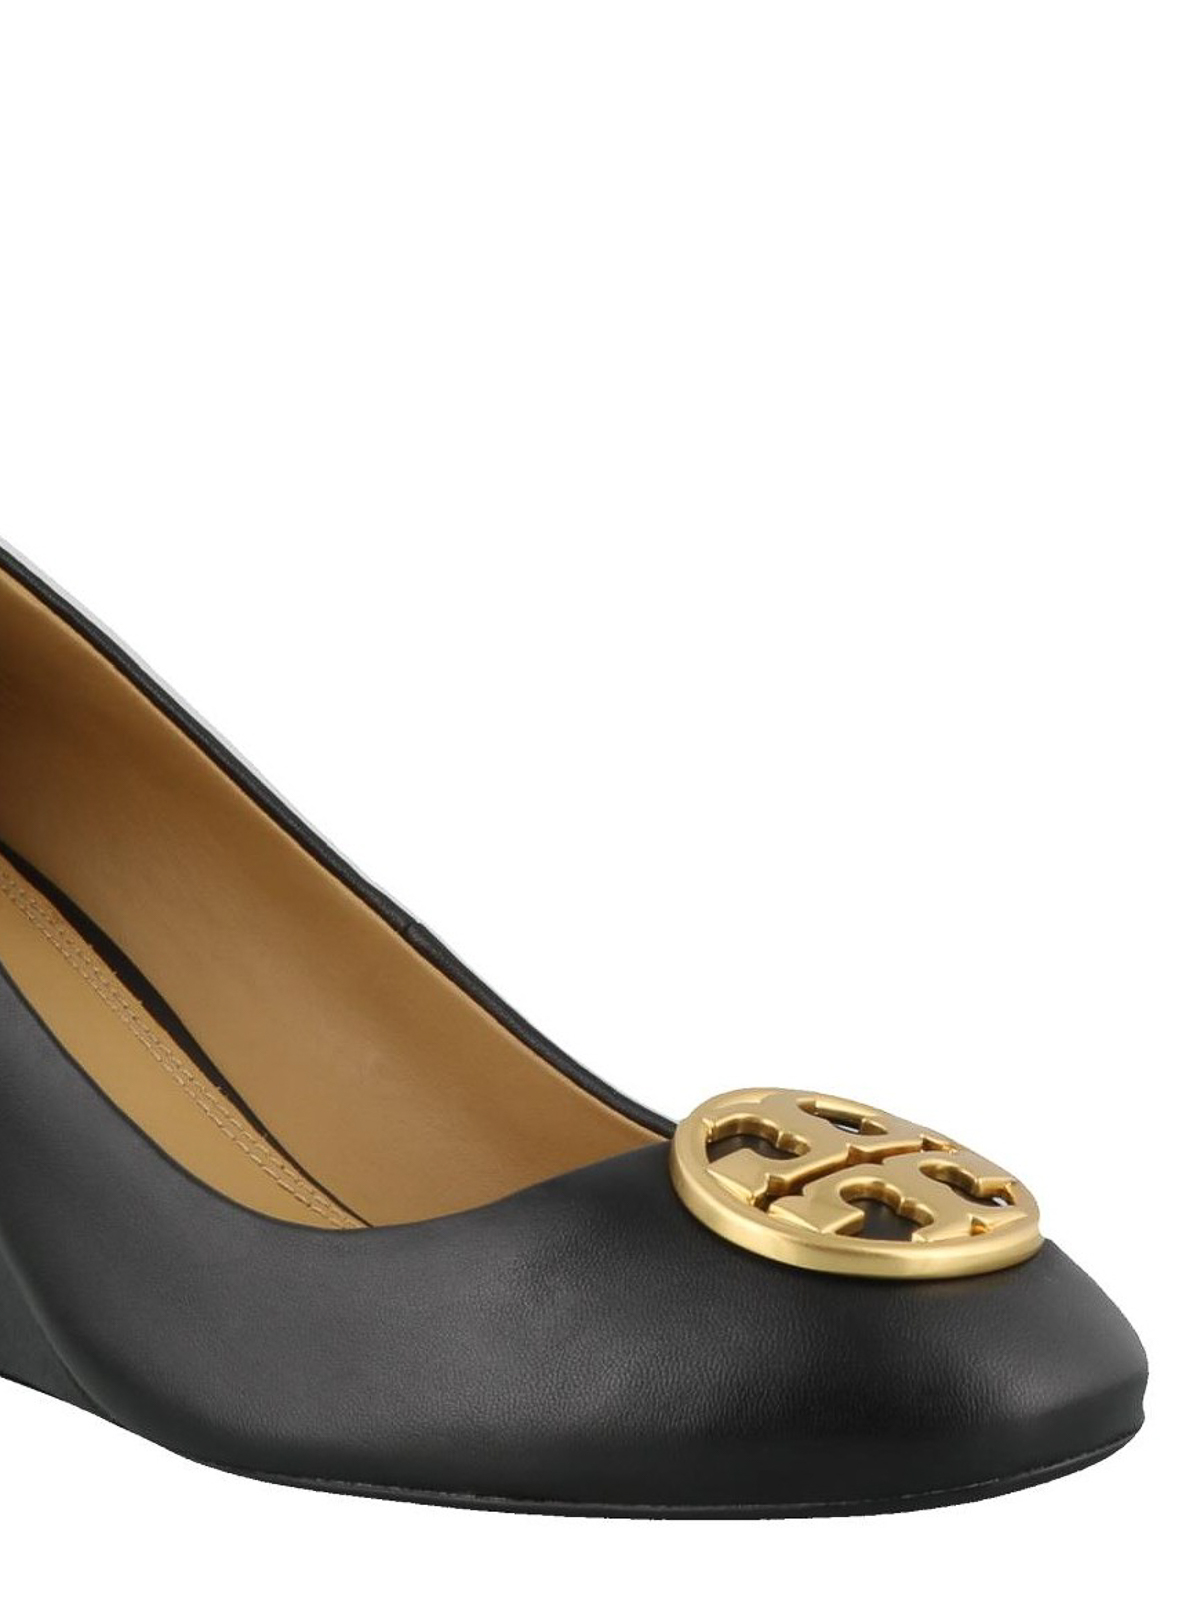 Court shoes Tory Burch - Chelsea leather wedge pumps - 45899006